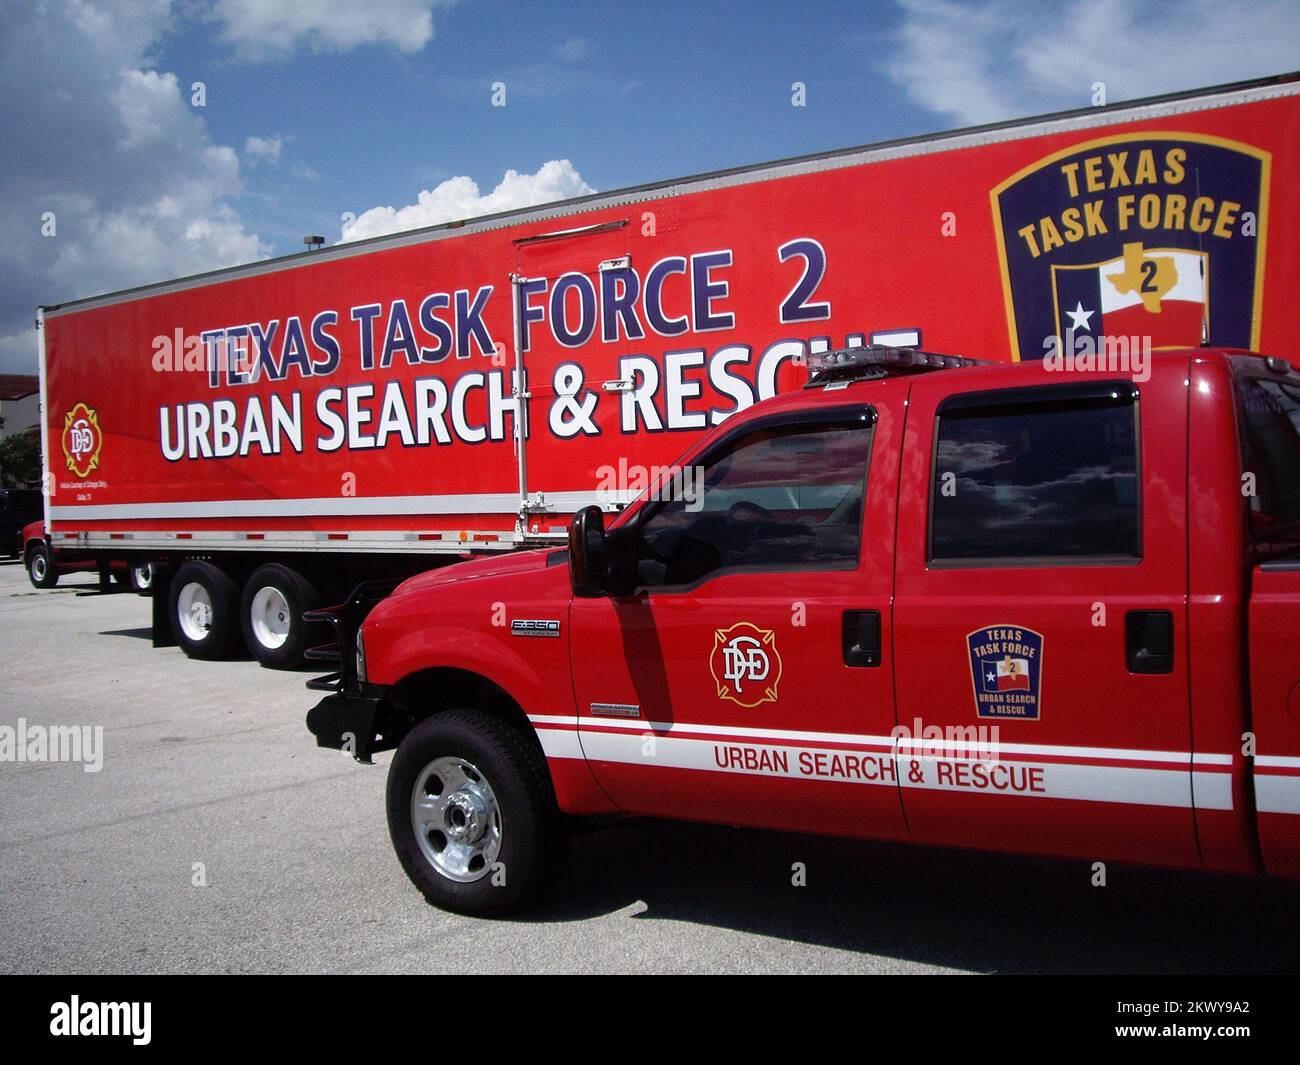 San Antonio, Texas, August 21, 2007   Texas Task Force Two, an integral part of our country's search and rescue capability, awaits forward deployment to Texas' Gulf Coast as part of this nation's Hurricane Dean response.  .. Photographs Relating to Disasters and Emergency Management Programs, Activities, and Officials Stock Photo